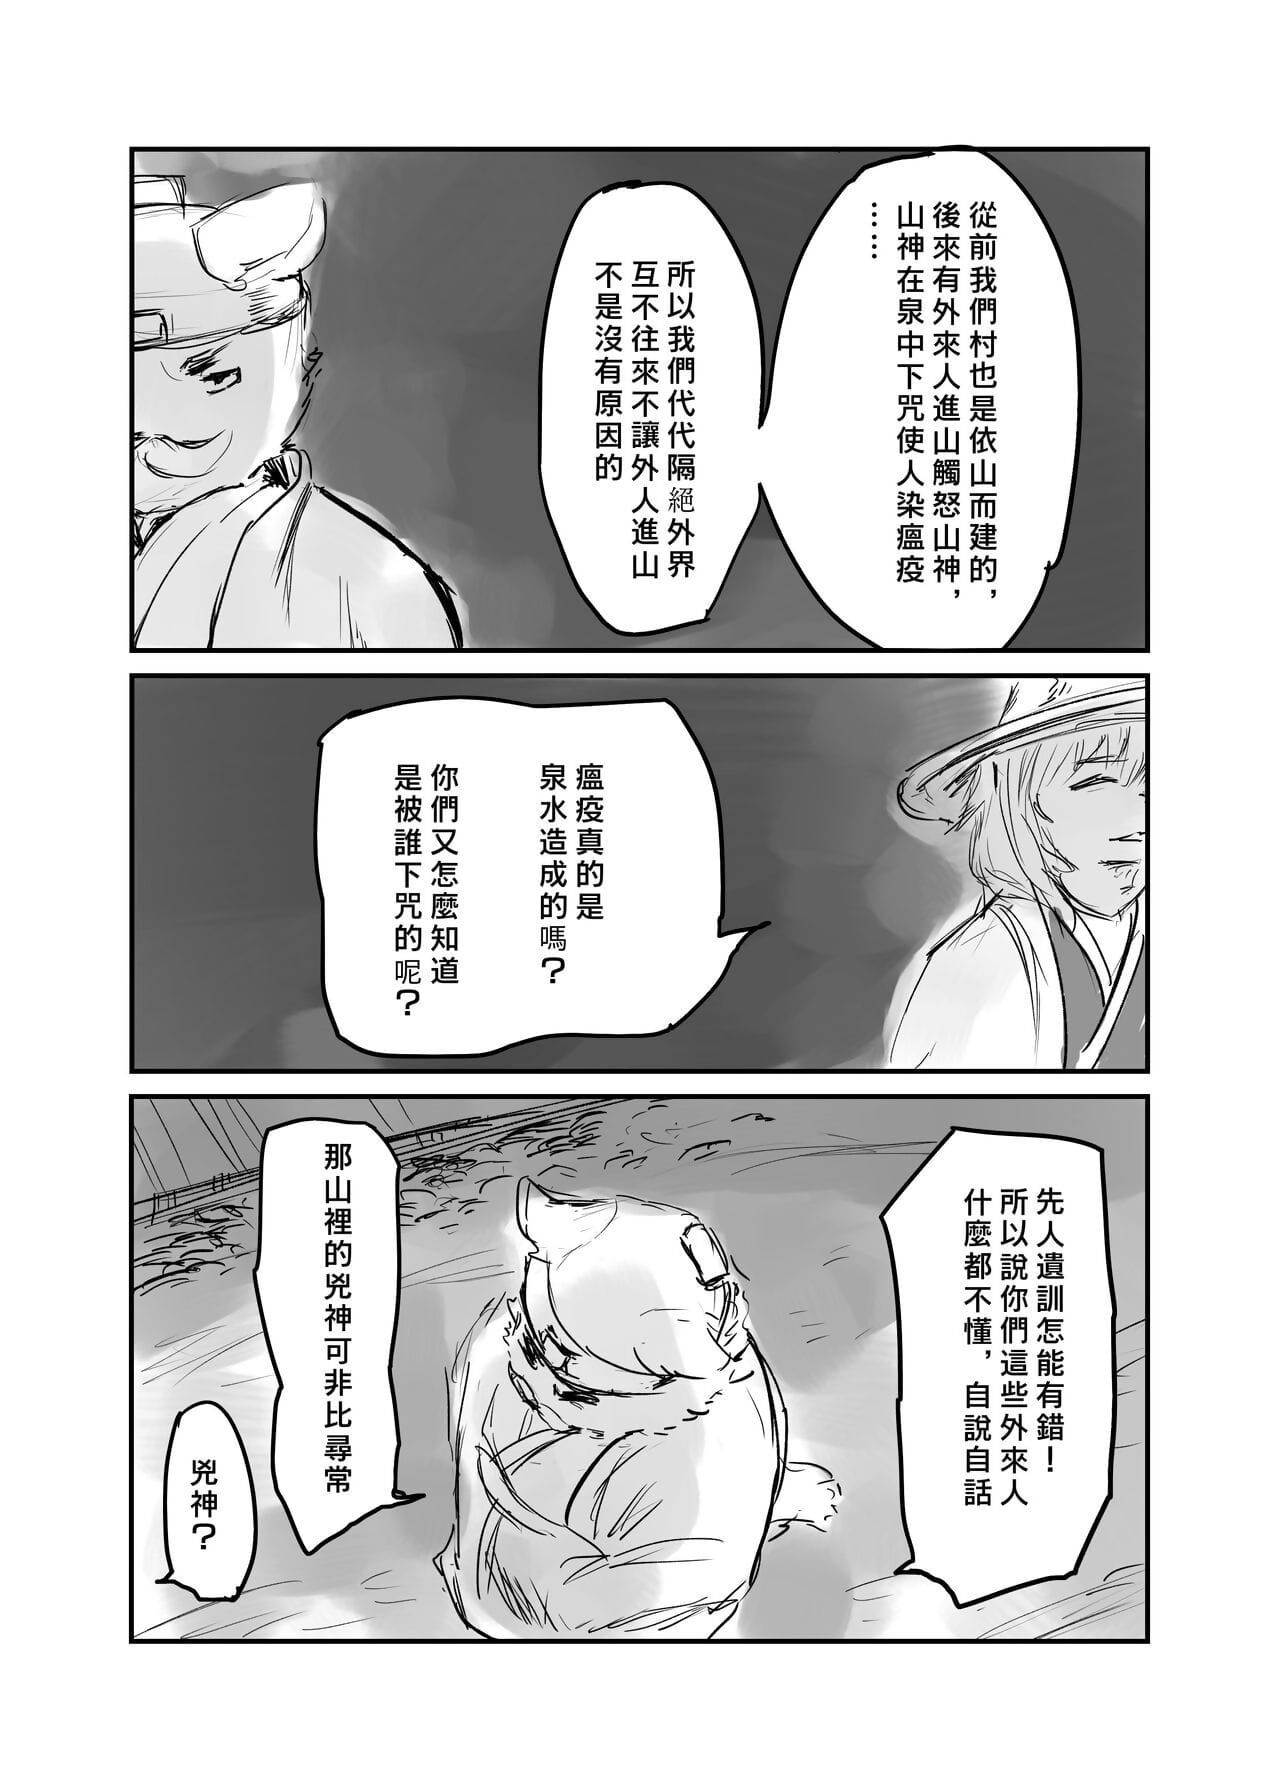 （the 访客 他乡之人 by：鬼流 page 1